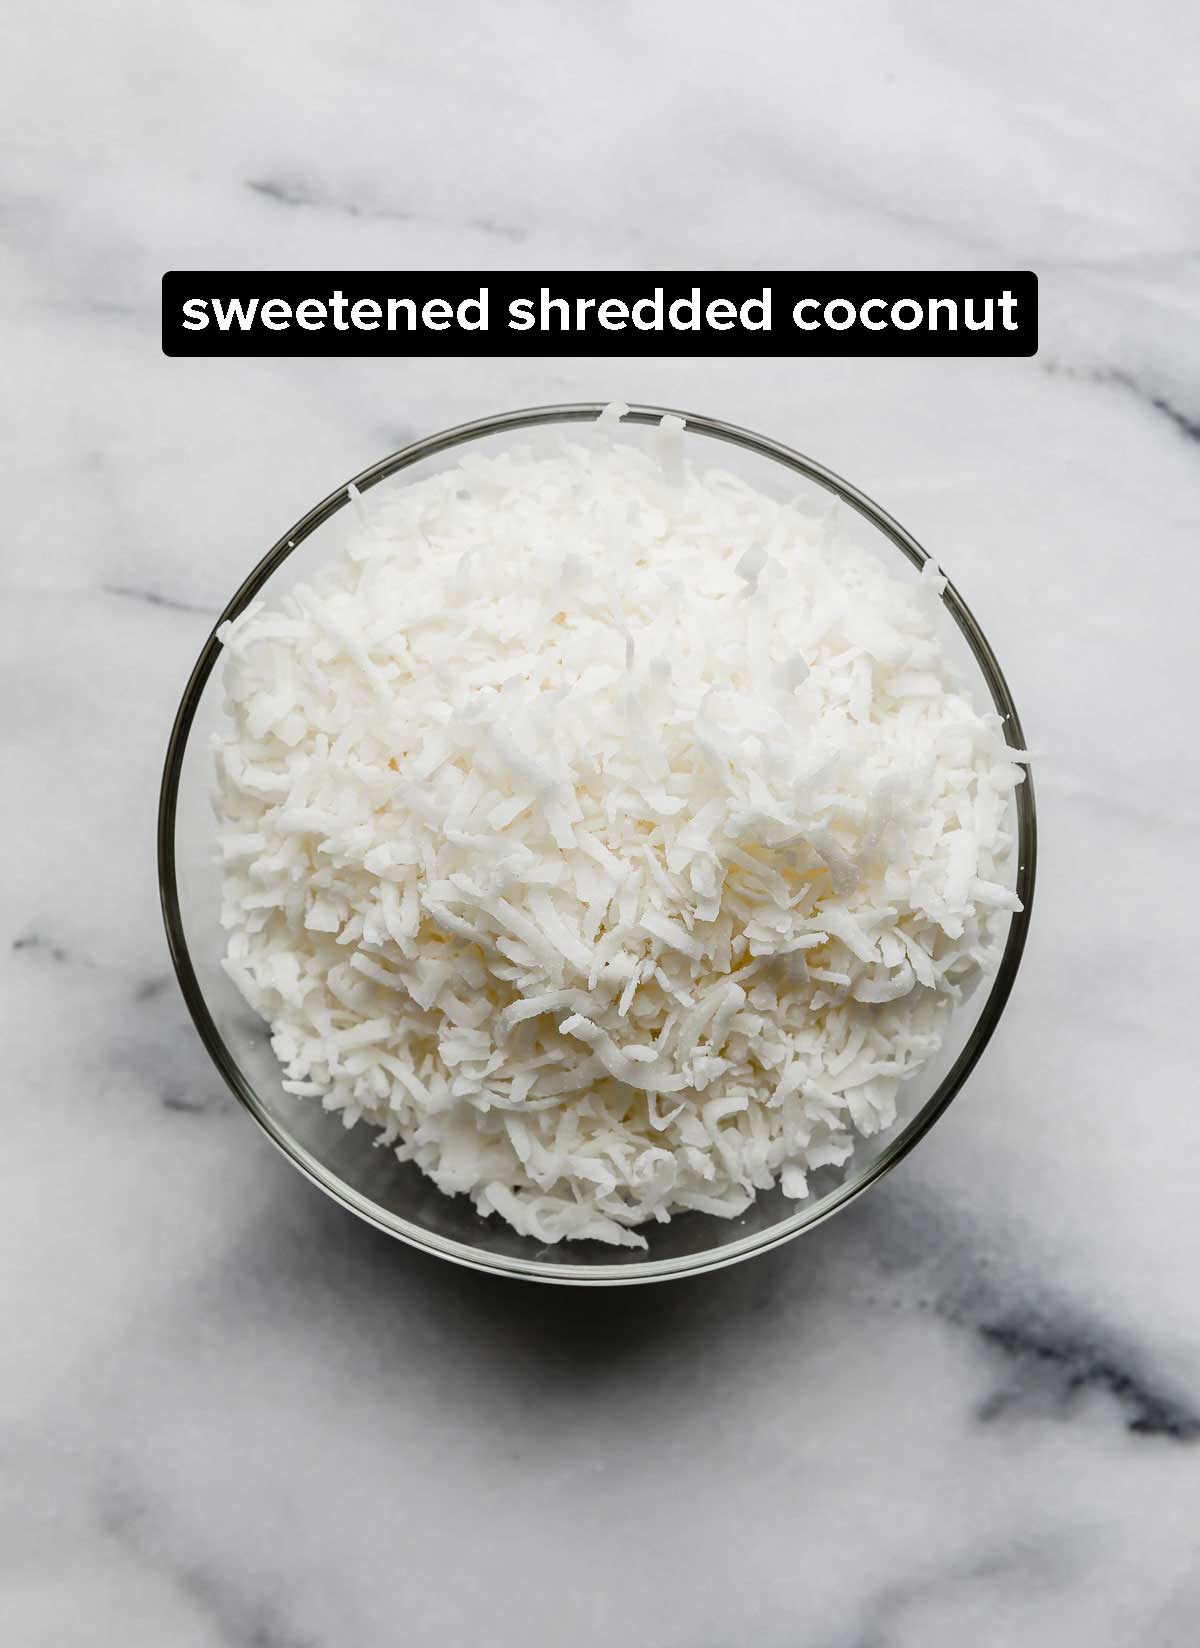 Sweetened shredded coconut in a glass bowl on a white marble background.